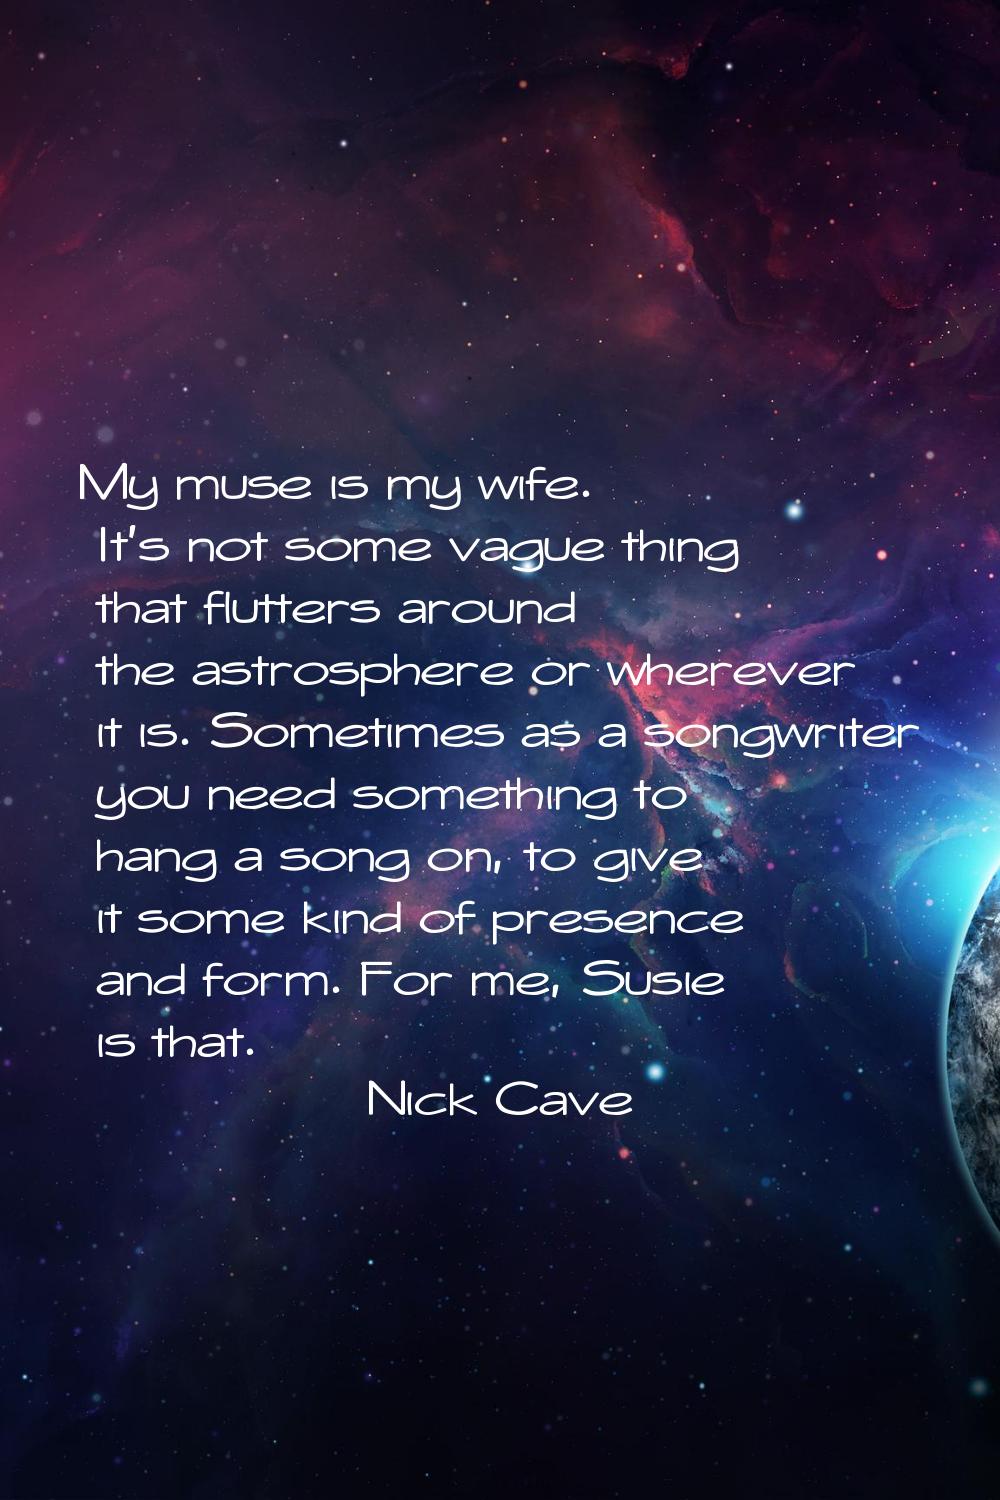 My muse is my wife. It's not some vague thing that flutters around the astrosphere or wherever it i